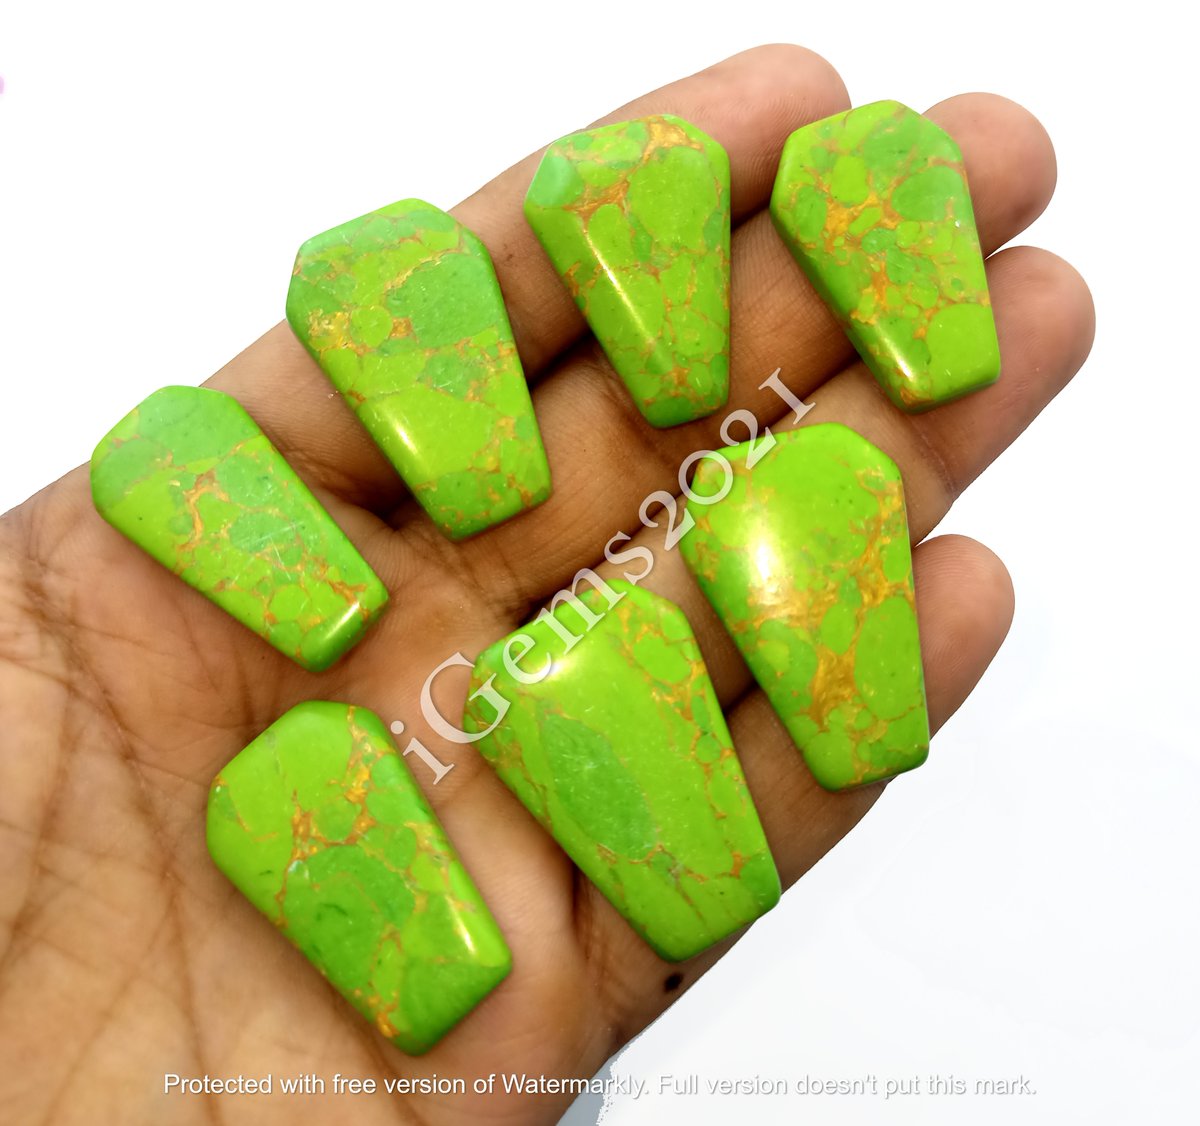 Green Copper Mohave Coffin Shape Gemstone Cabochon

$7 Each, Random Pick
Shipping$6 Combine Shipping Available
Size: 20-40MM APPROX.
Free Drilling Service

#coffinshapestone #coffinstone #copperstone #coppermohave #greenmohave #cabochon #cabochonsupplier #cabochonsforsale